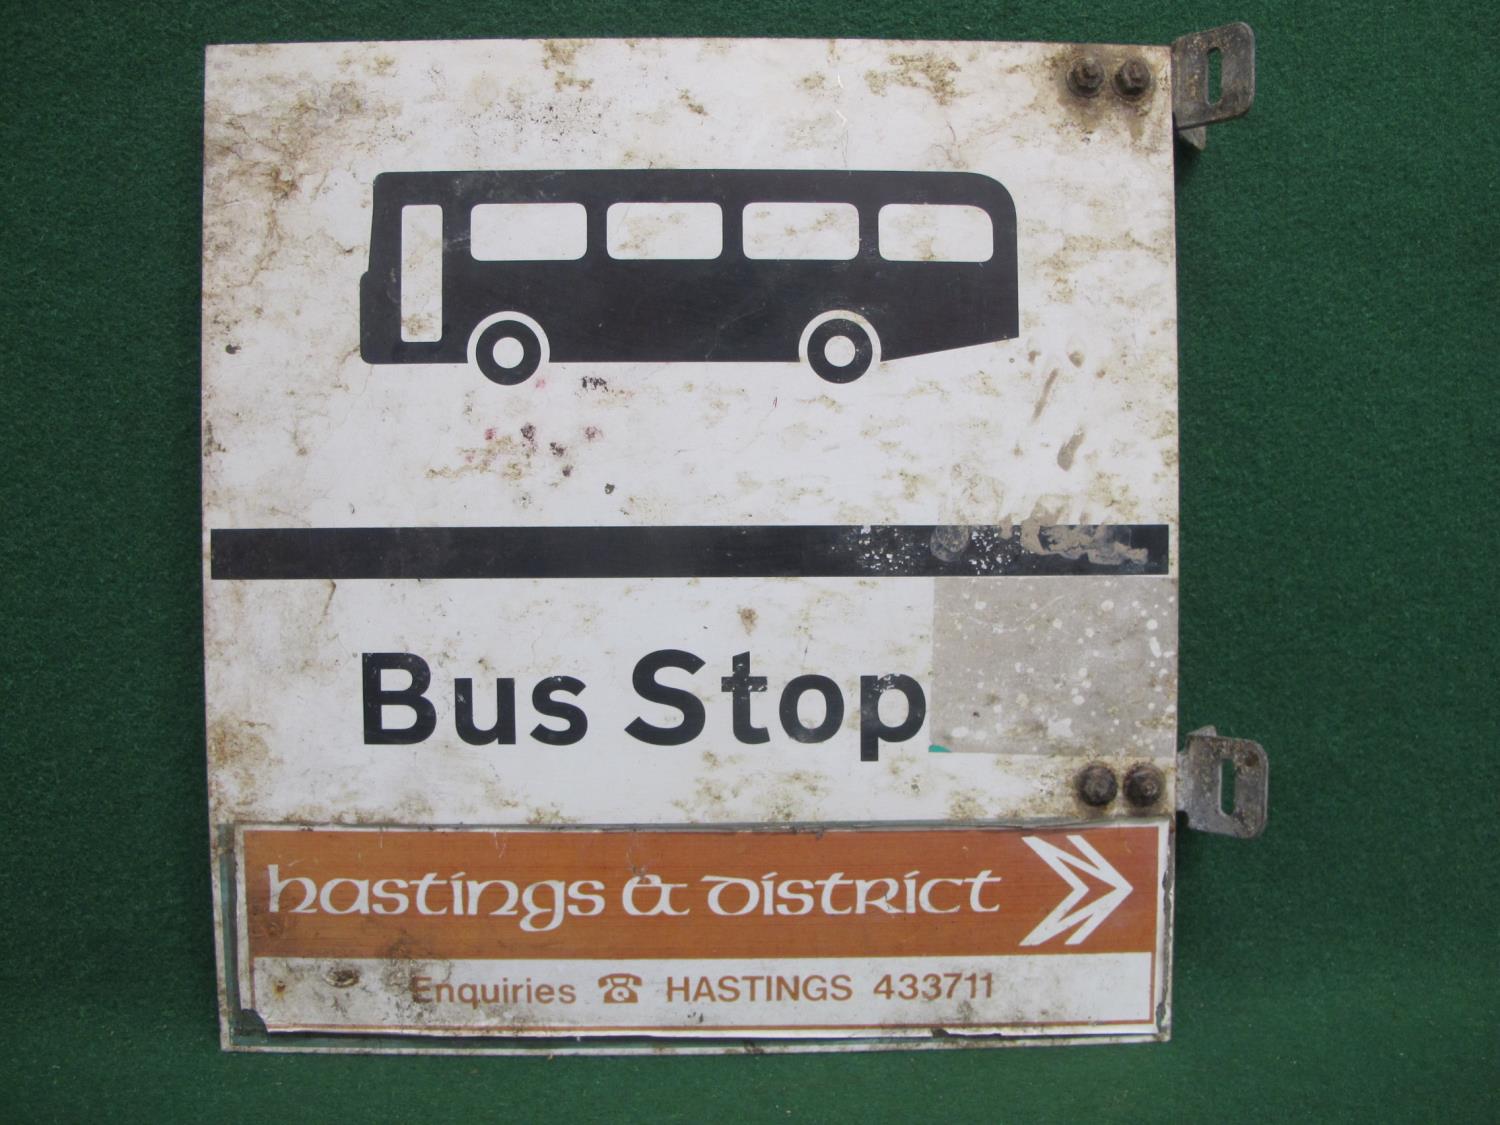 Double sided aluminium Bus Stop sign with Maidstone & District and Hastings & District stickers on - Image 2 of 3